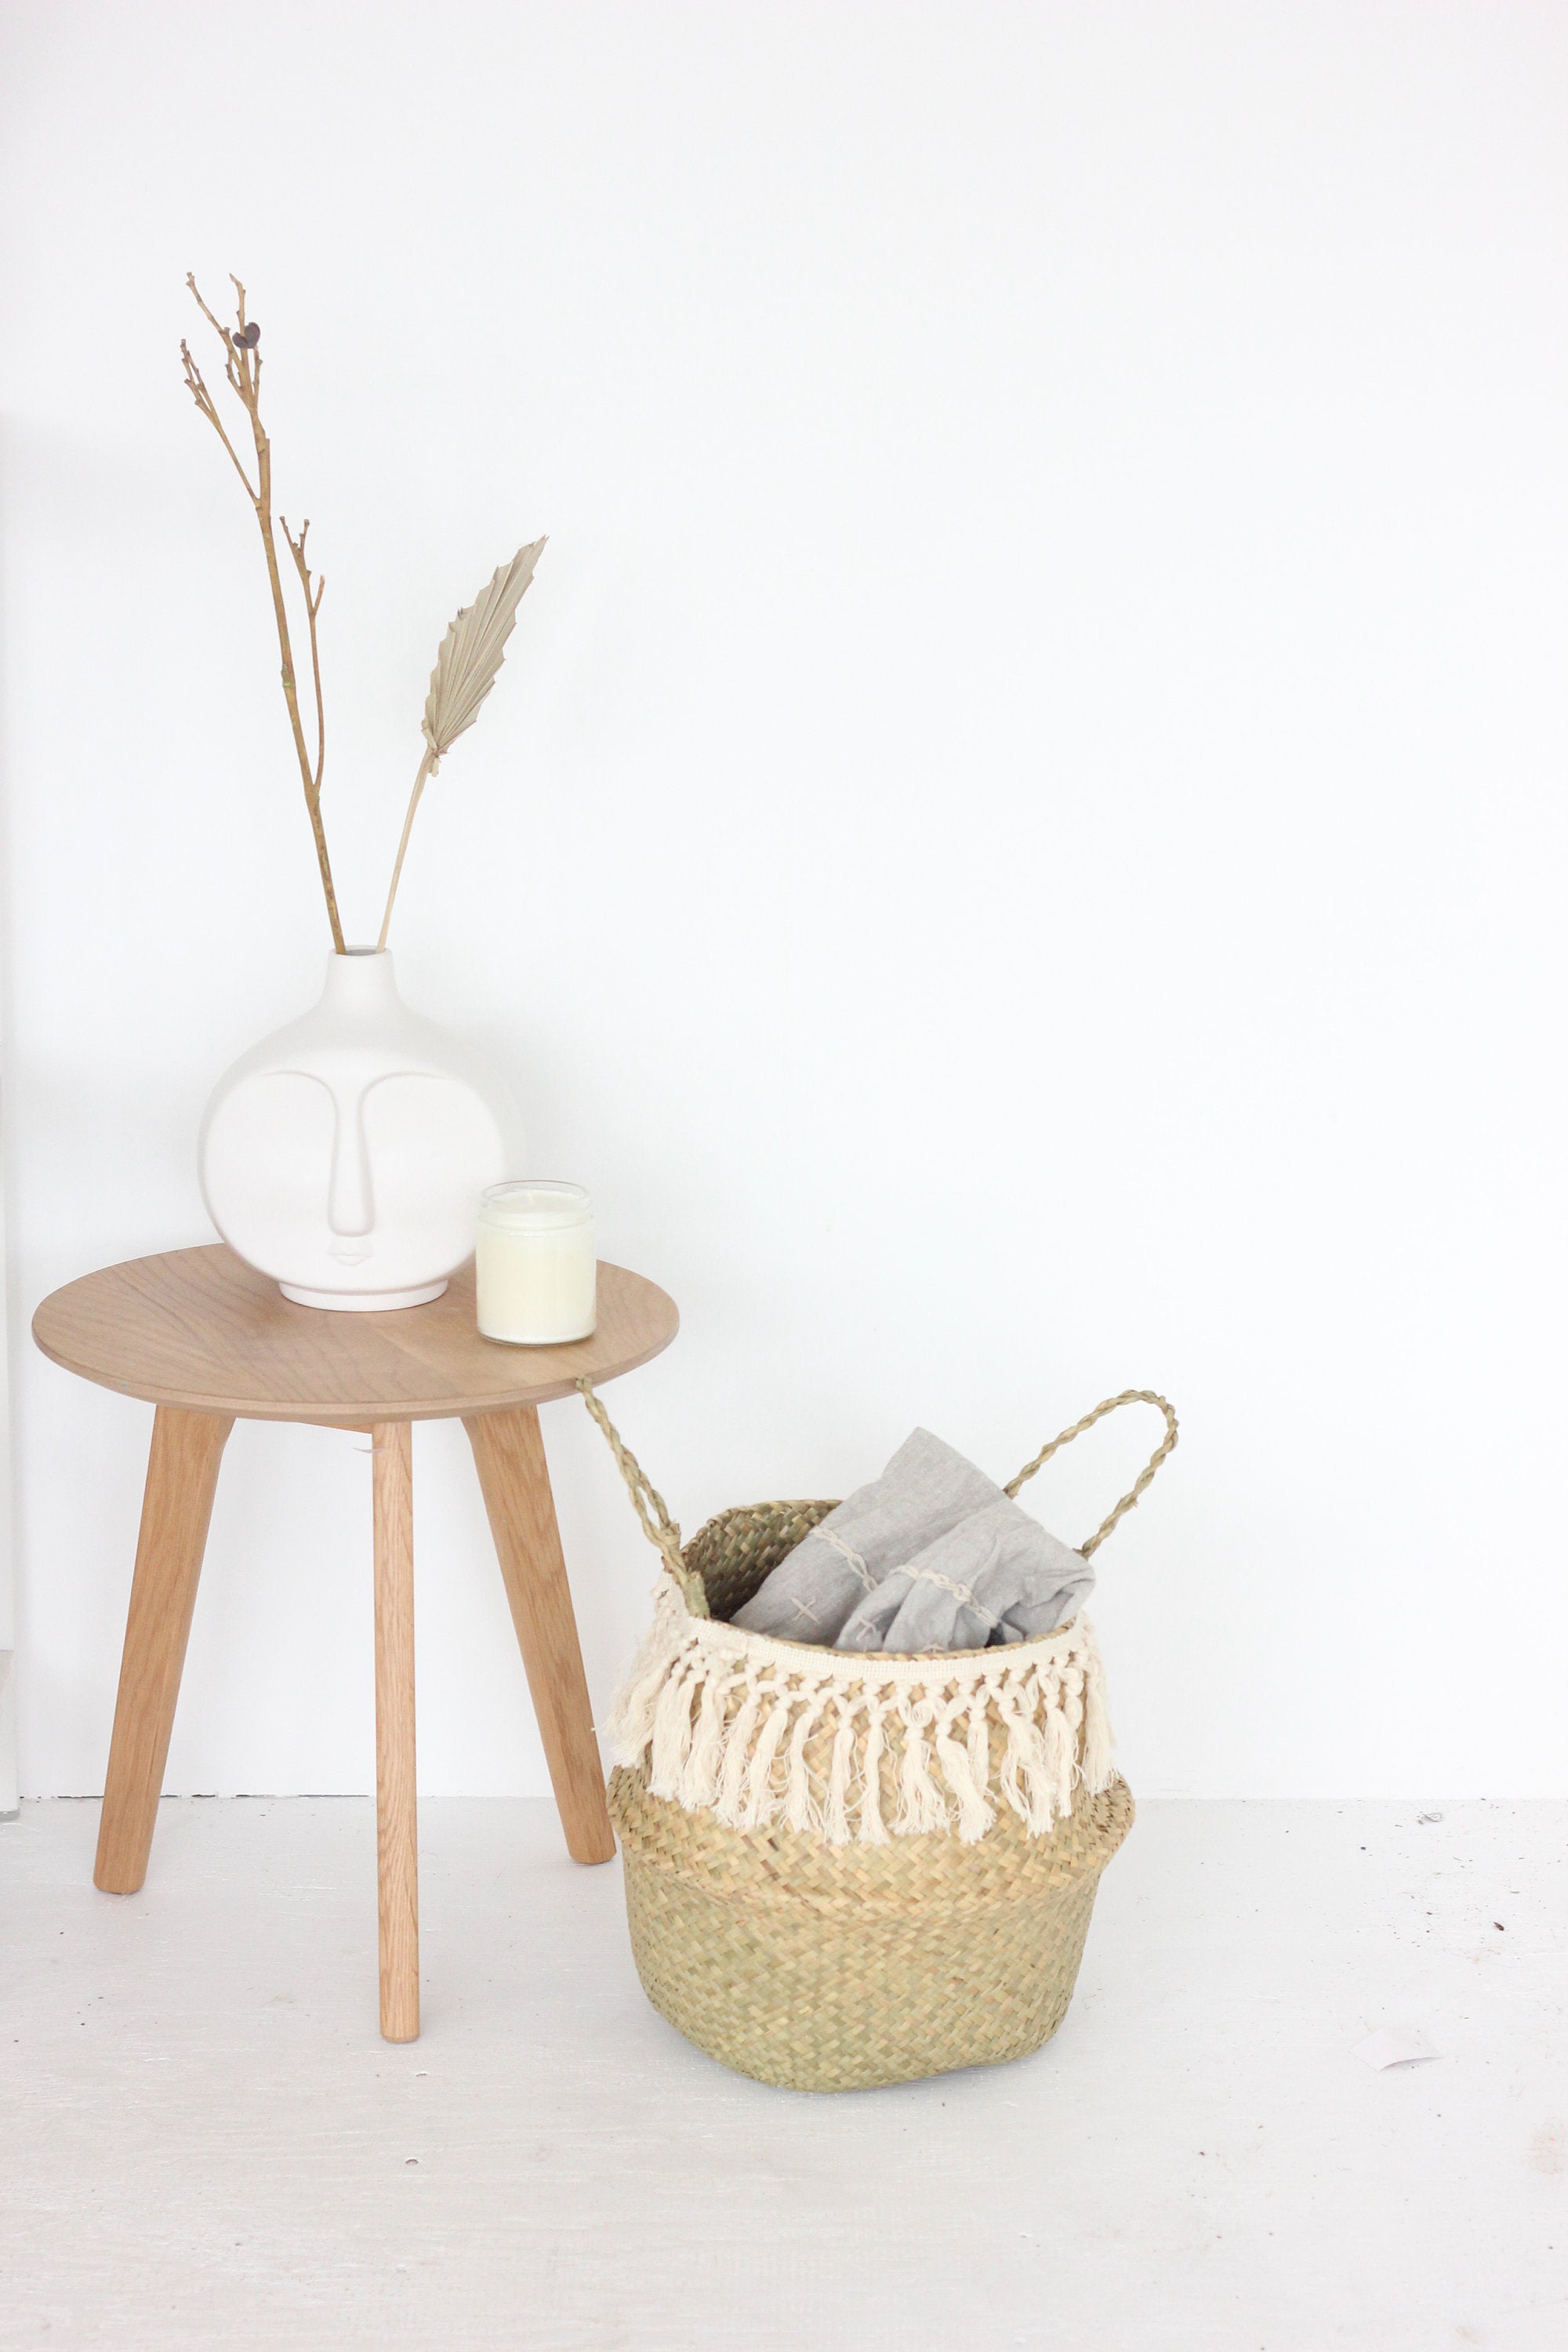 Tasseled Belly Basket in White and Natural